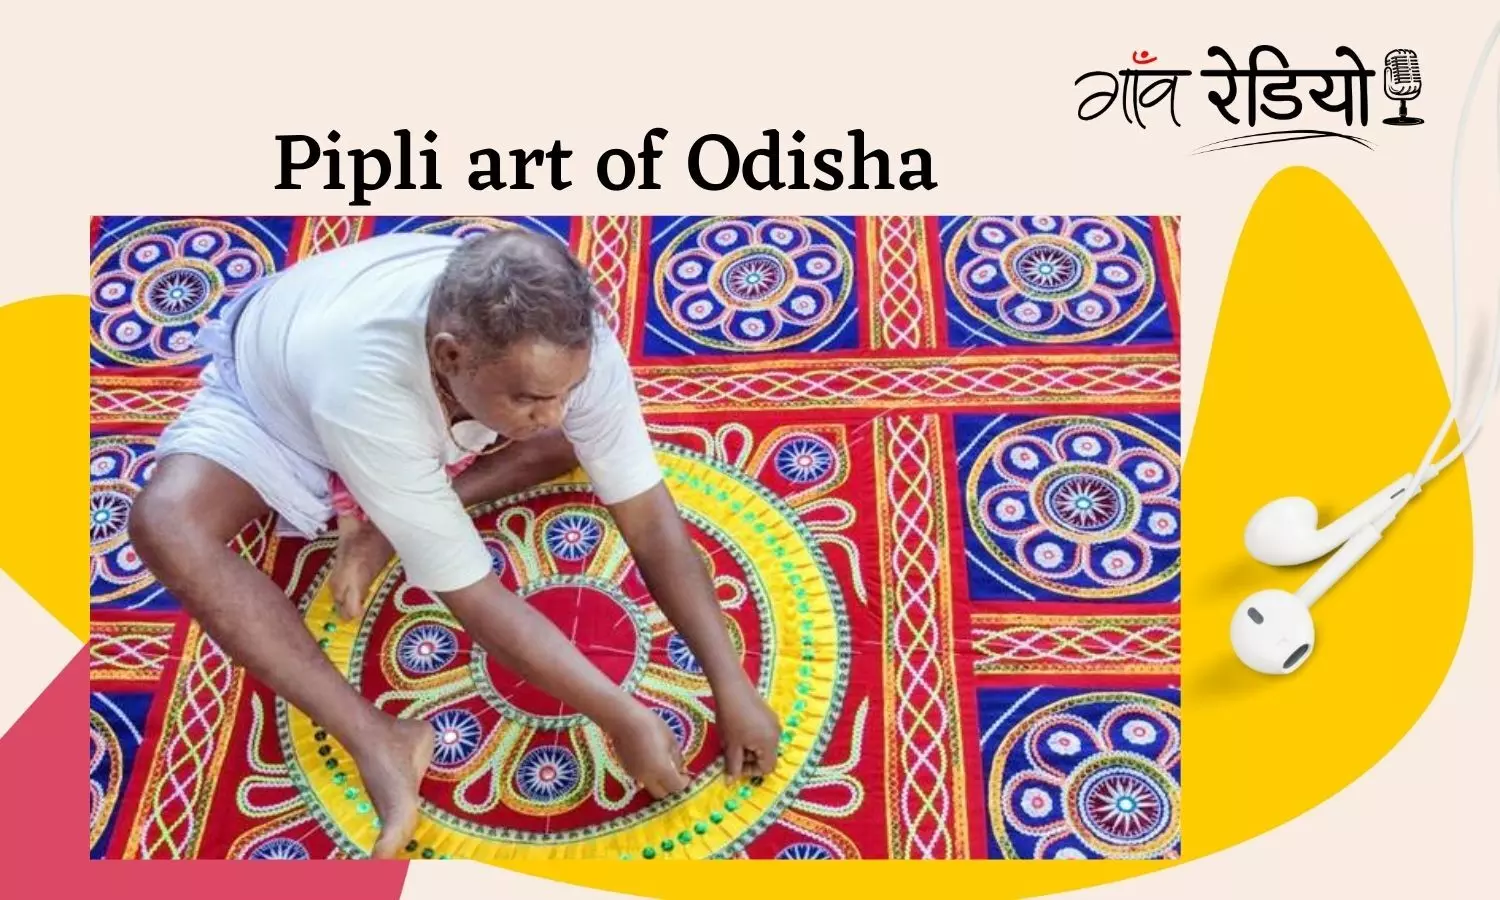 The 12th century craft of Pipili work in Odisha losing its vibrancy